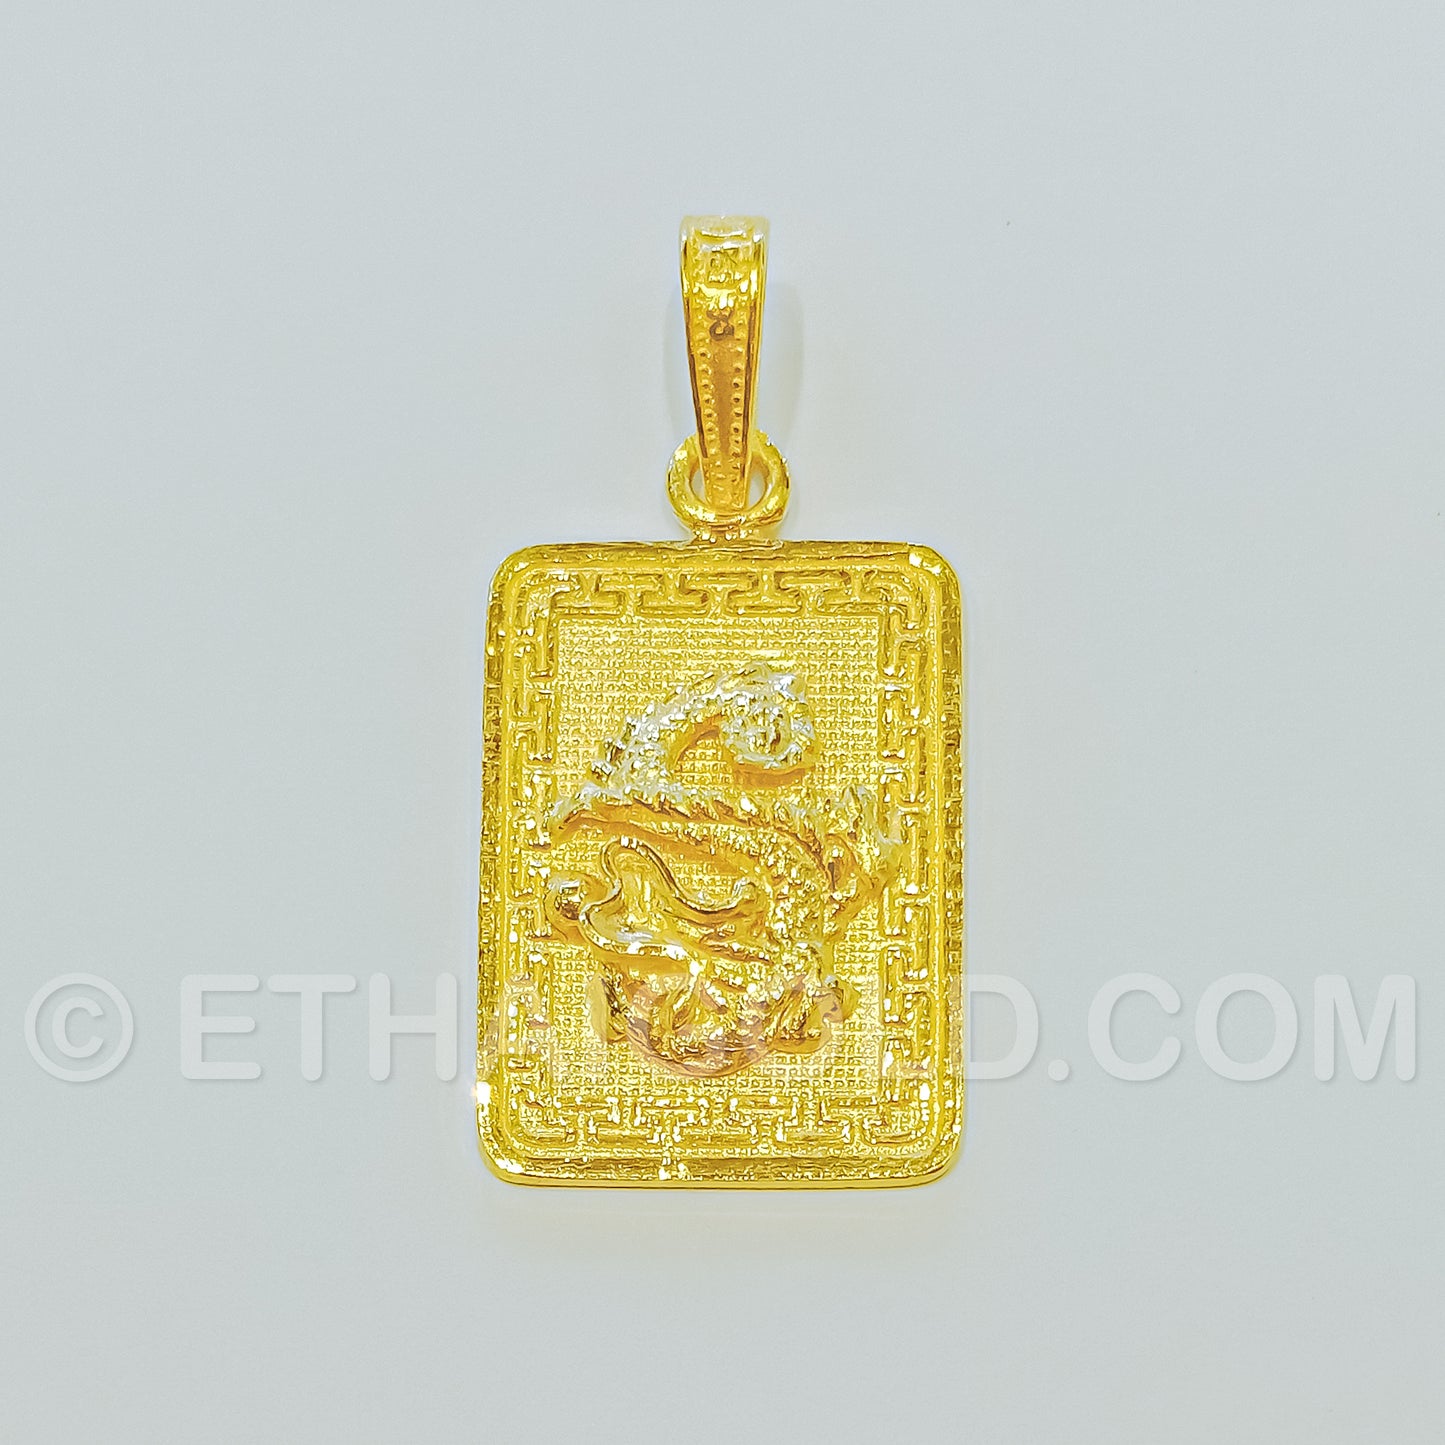 1/2 BAHT POLISHED MATTE SOLID RECTANGLE DRAGON PENDANT IN 23K GOLD (ID: P0702S)